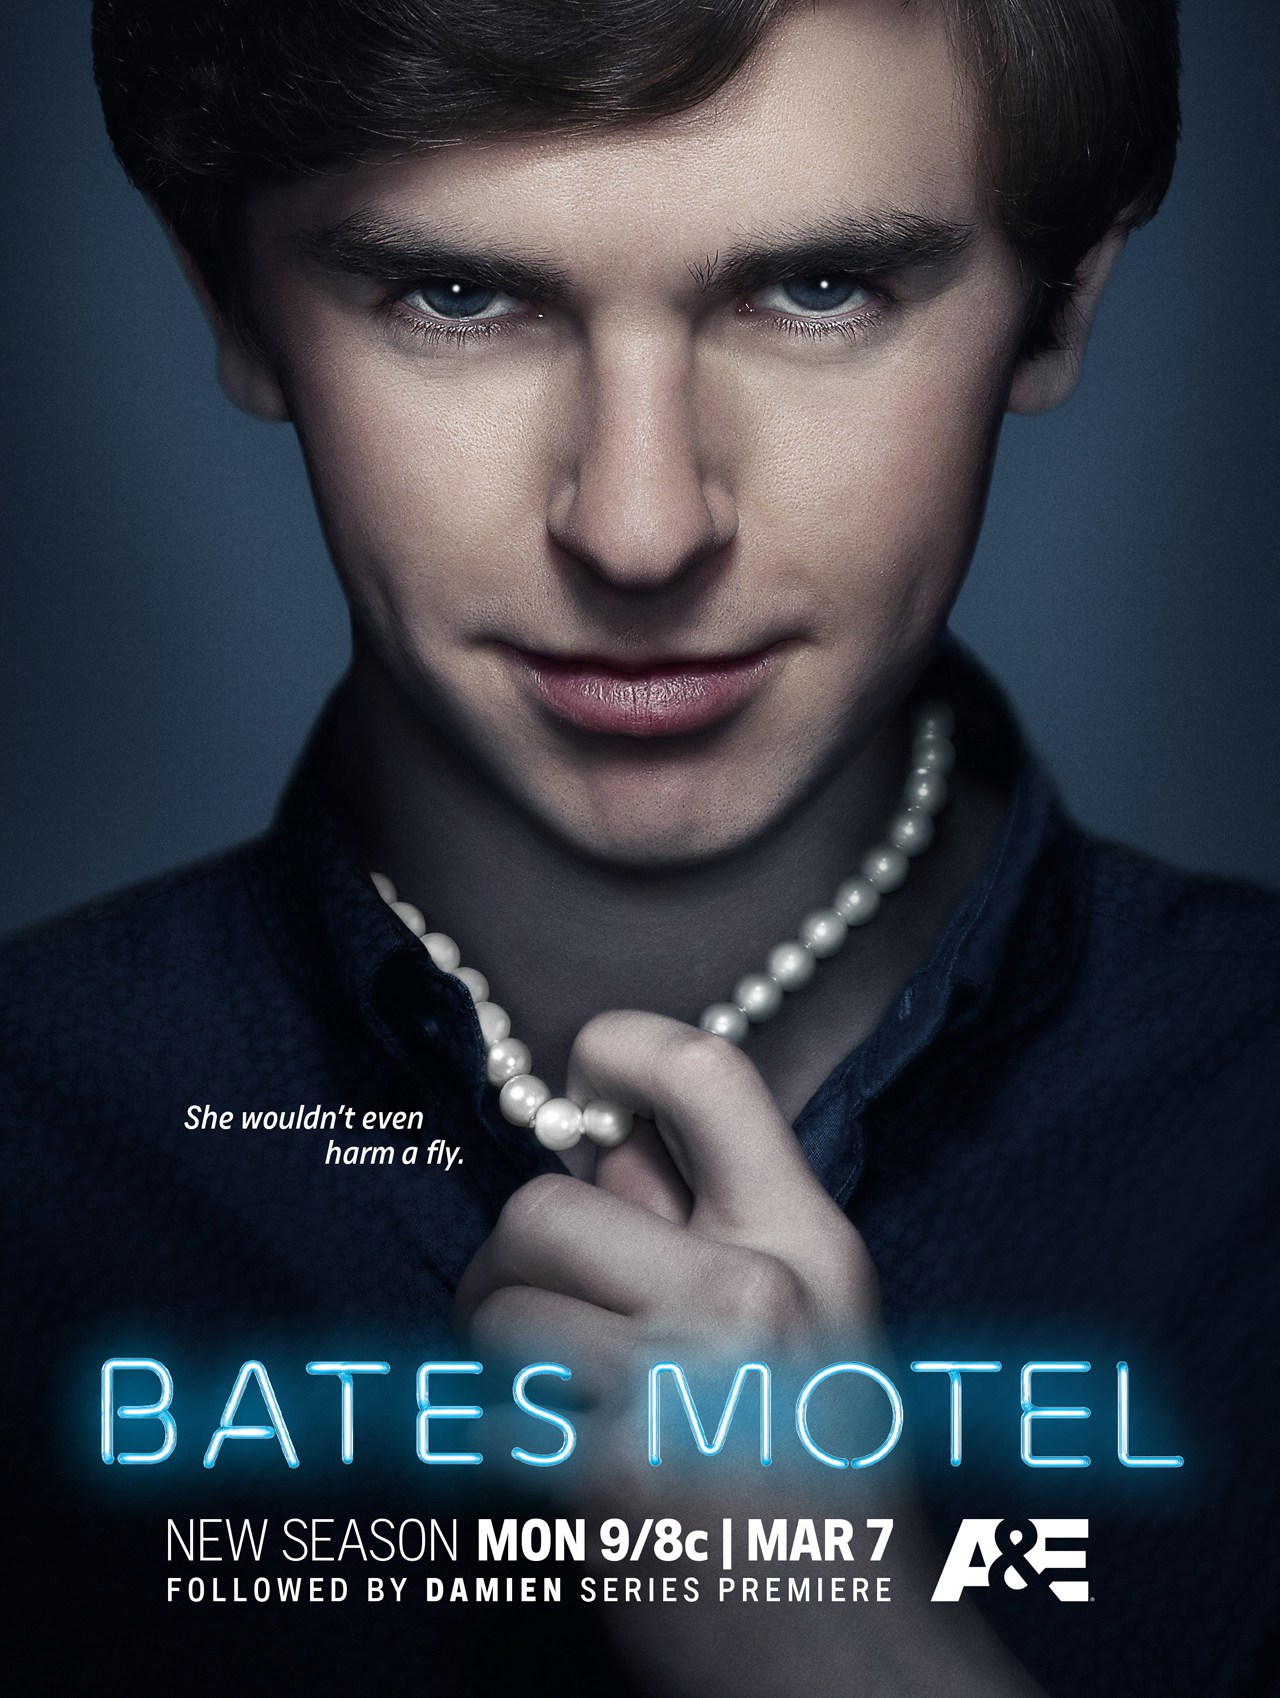 Bates Motel" Signs in its Most Iconic Guest: Season 5 Will End the Series  #SDCC - Bloody Disgusting